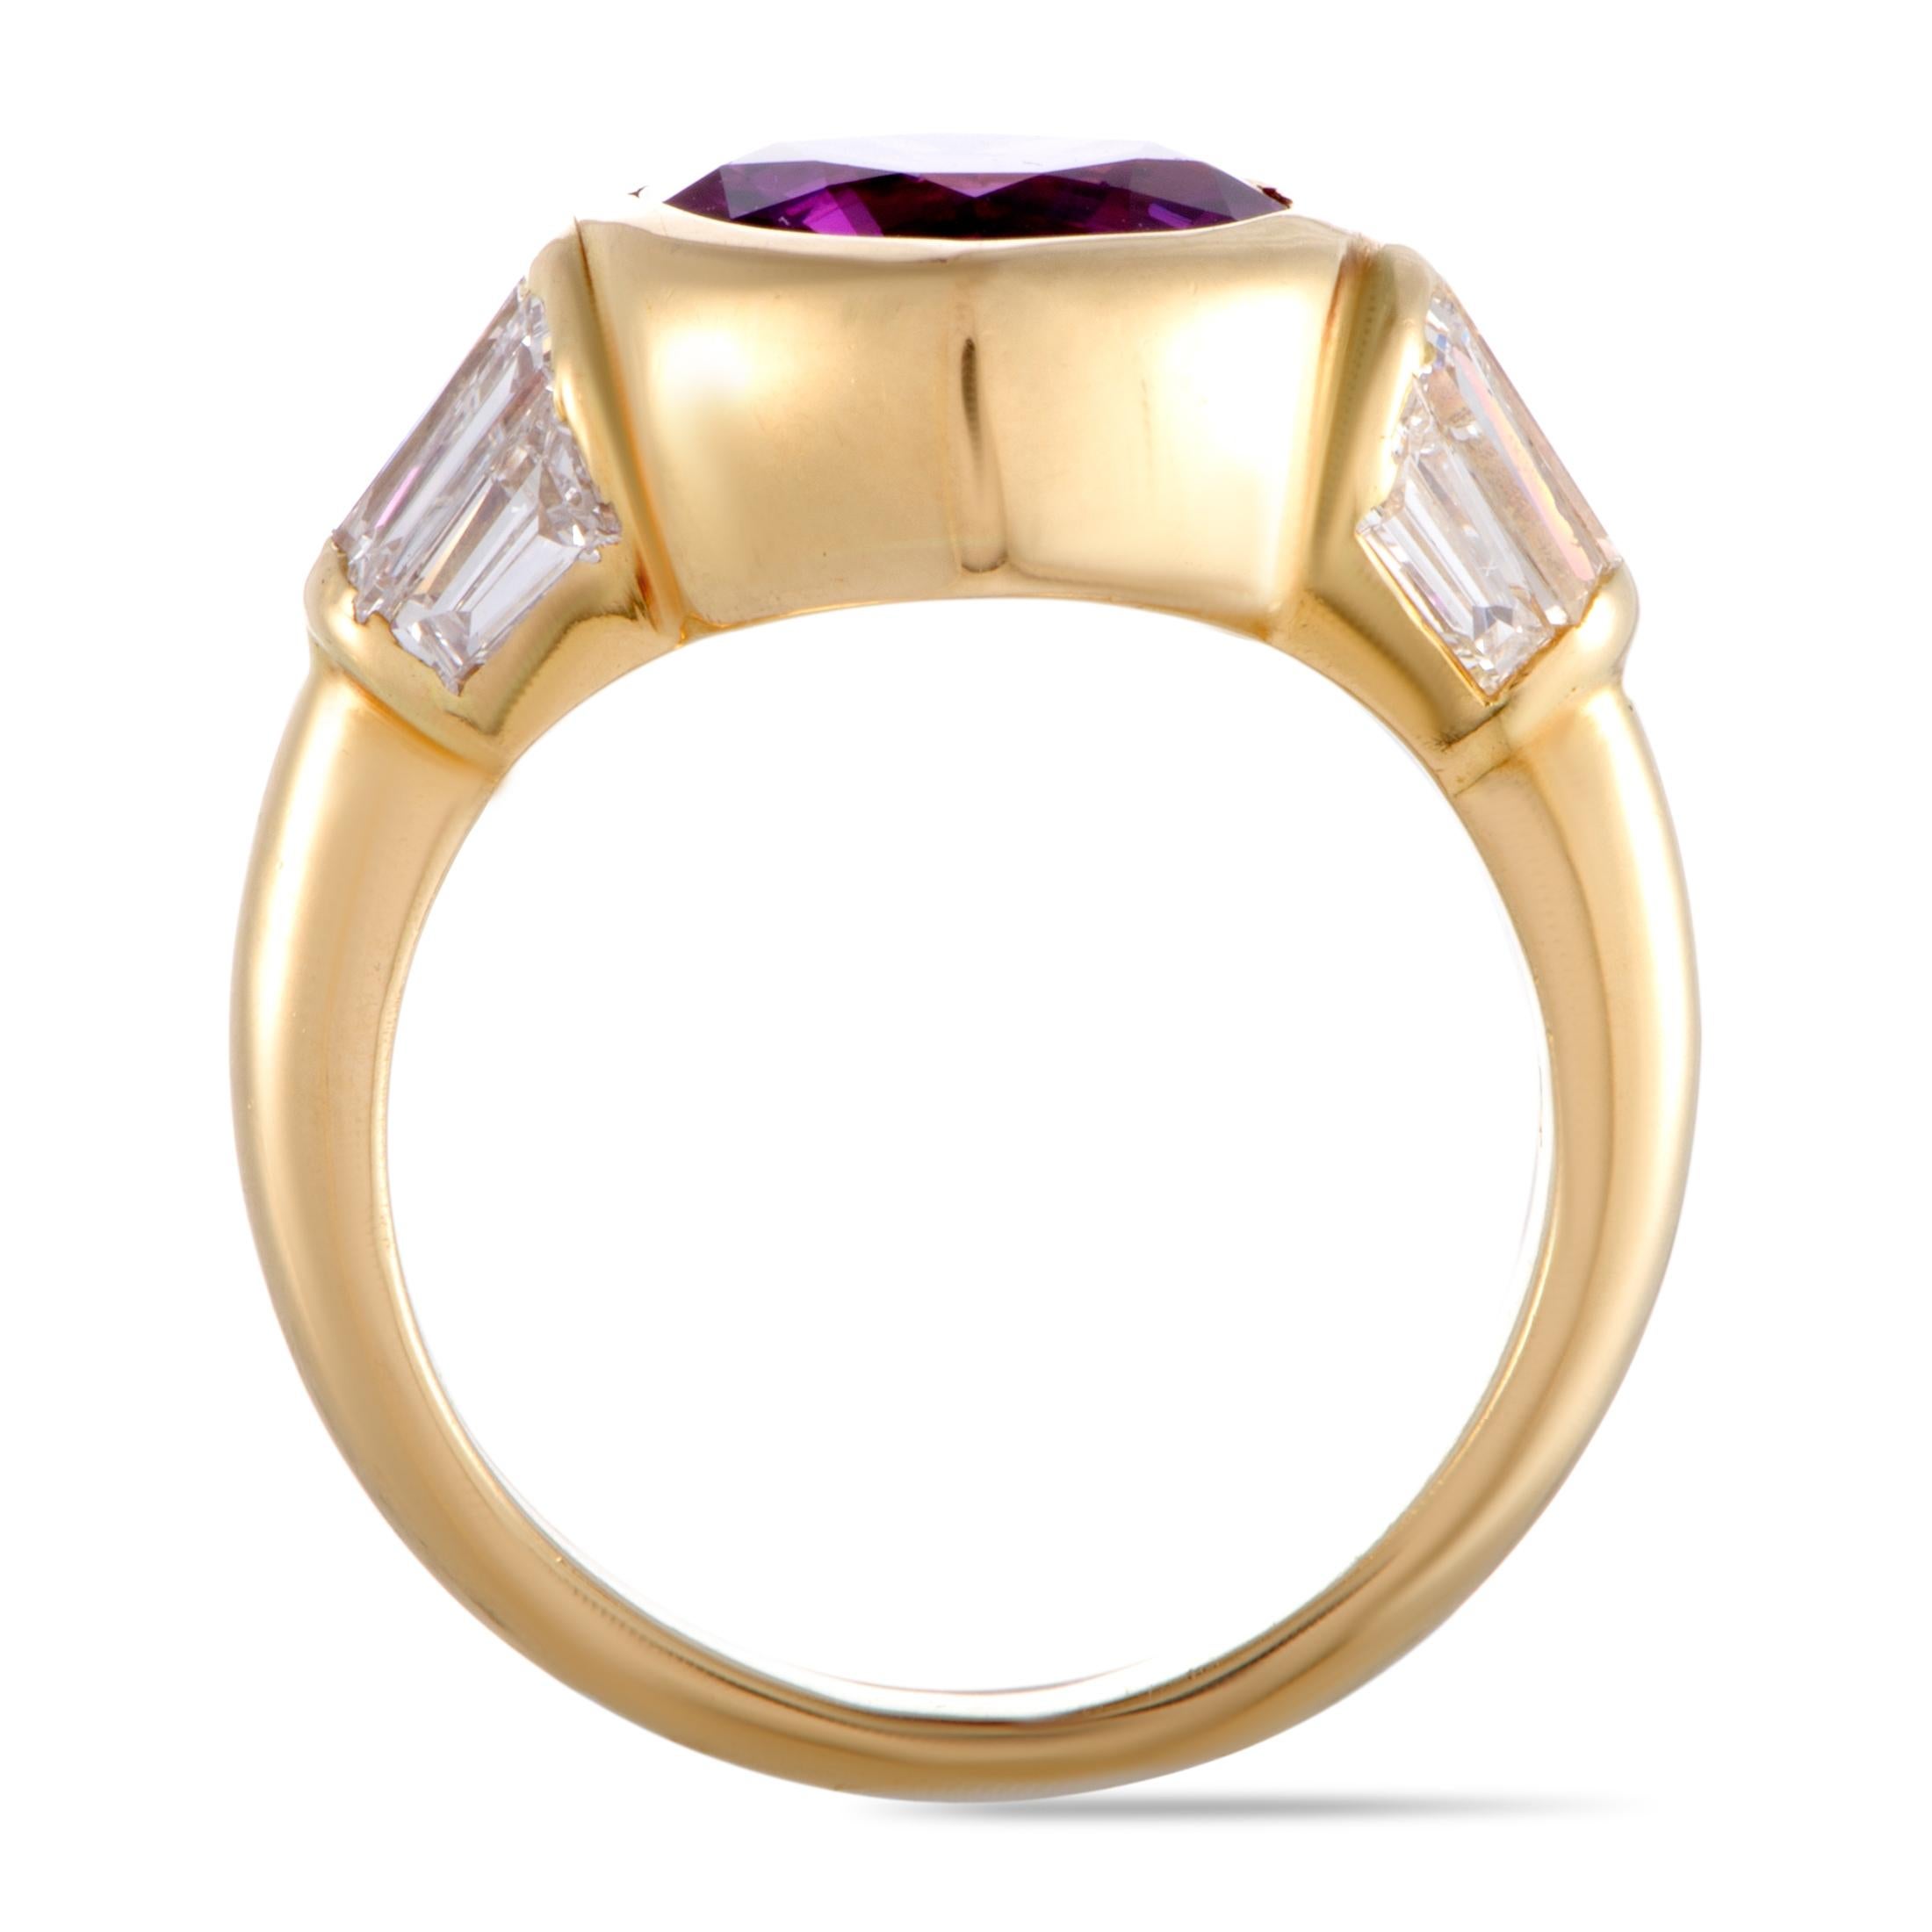 This gorgeous piece from Bvlgari exudes vivacious femininity through its lovely design that is attractively topped off with an eye-catching pink sapphire. The ring is expertly crafted from 18K yellow gold and it is also set with a total of 1.00